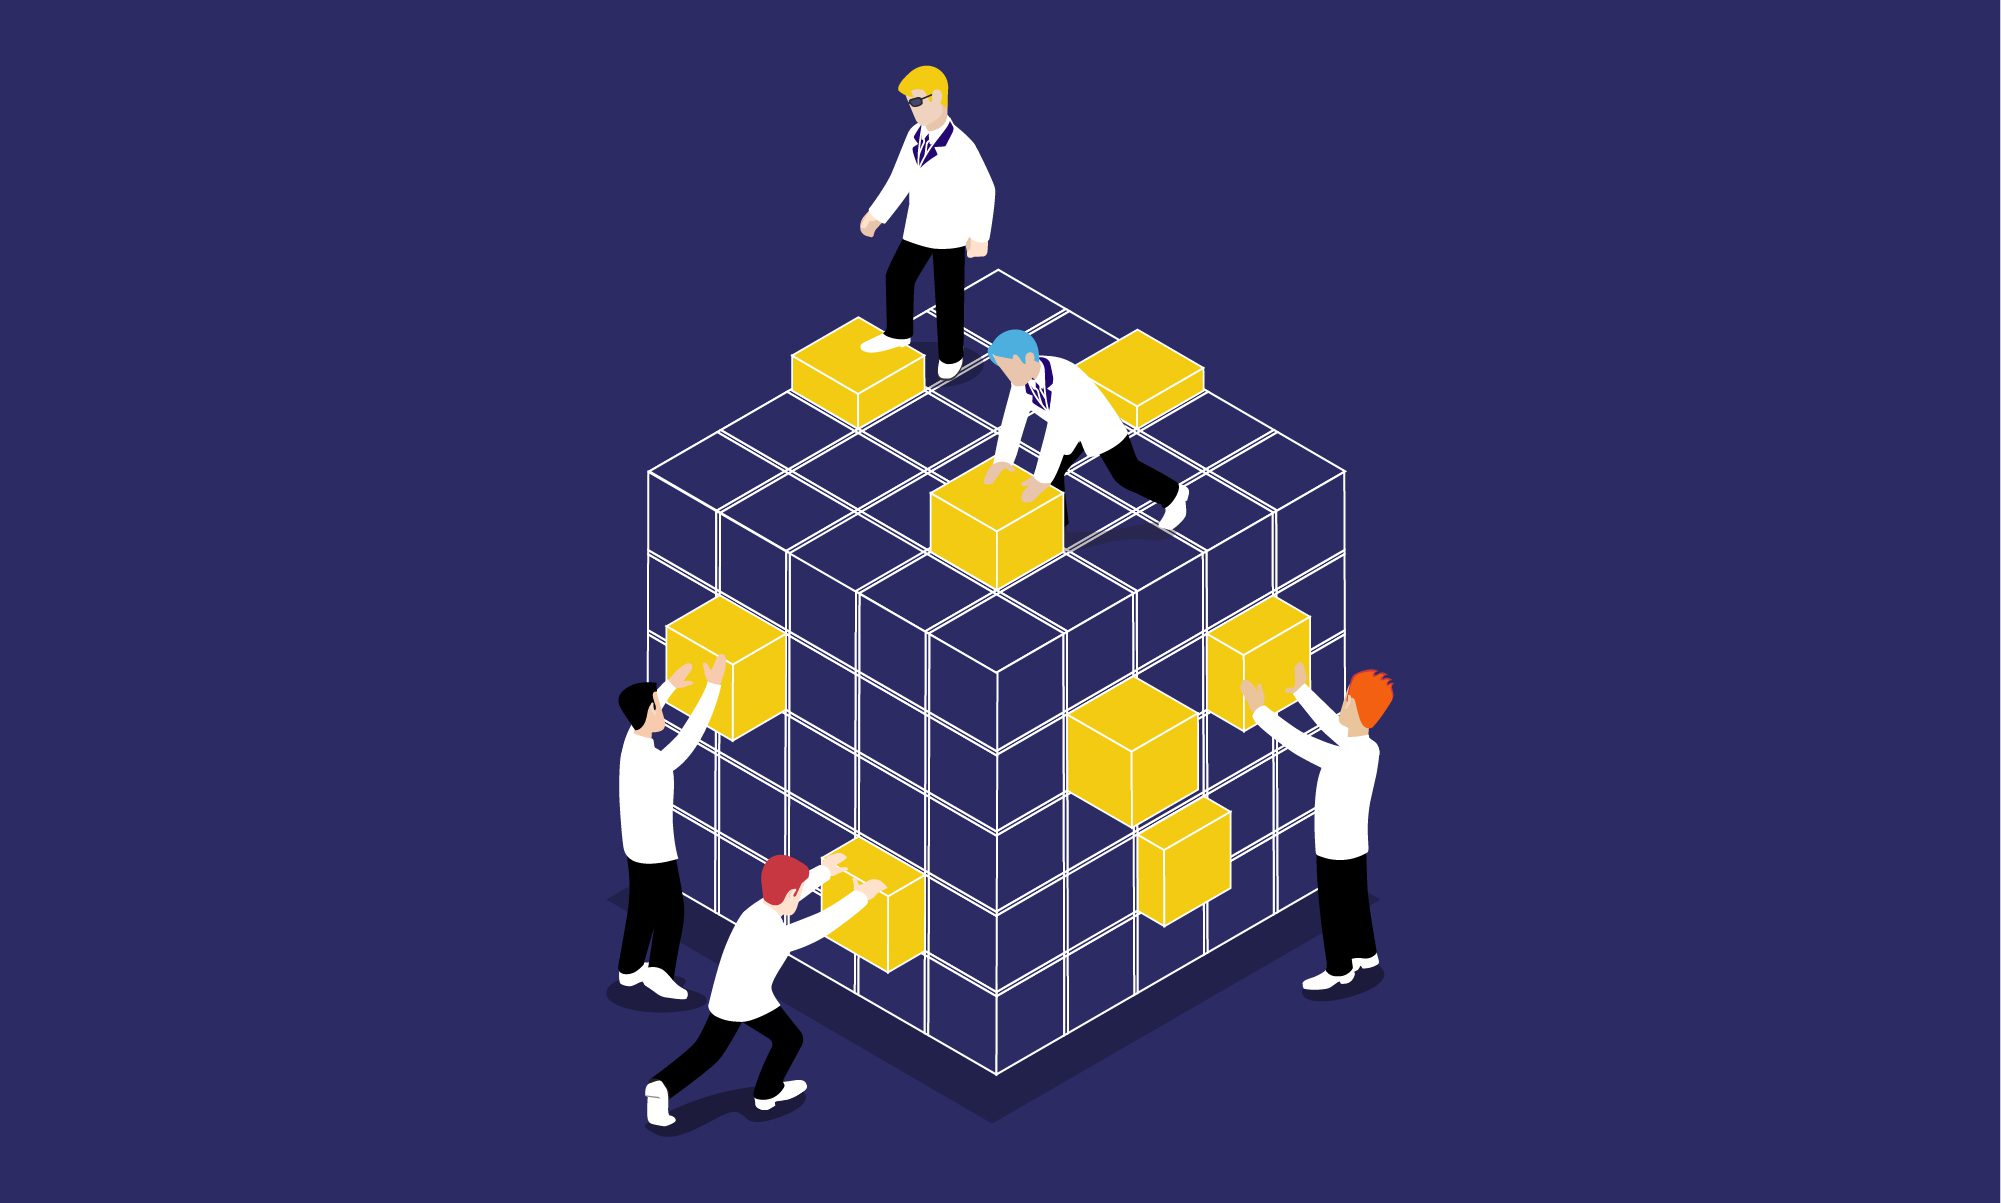 Three people solving a cubic puzzle graphic